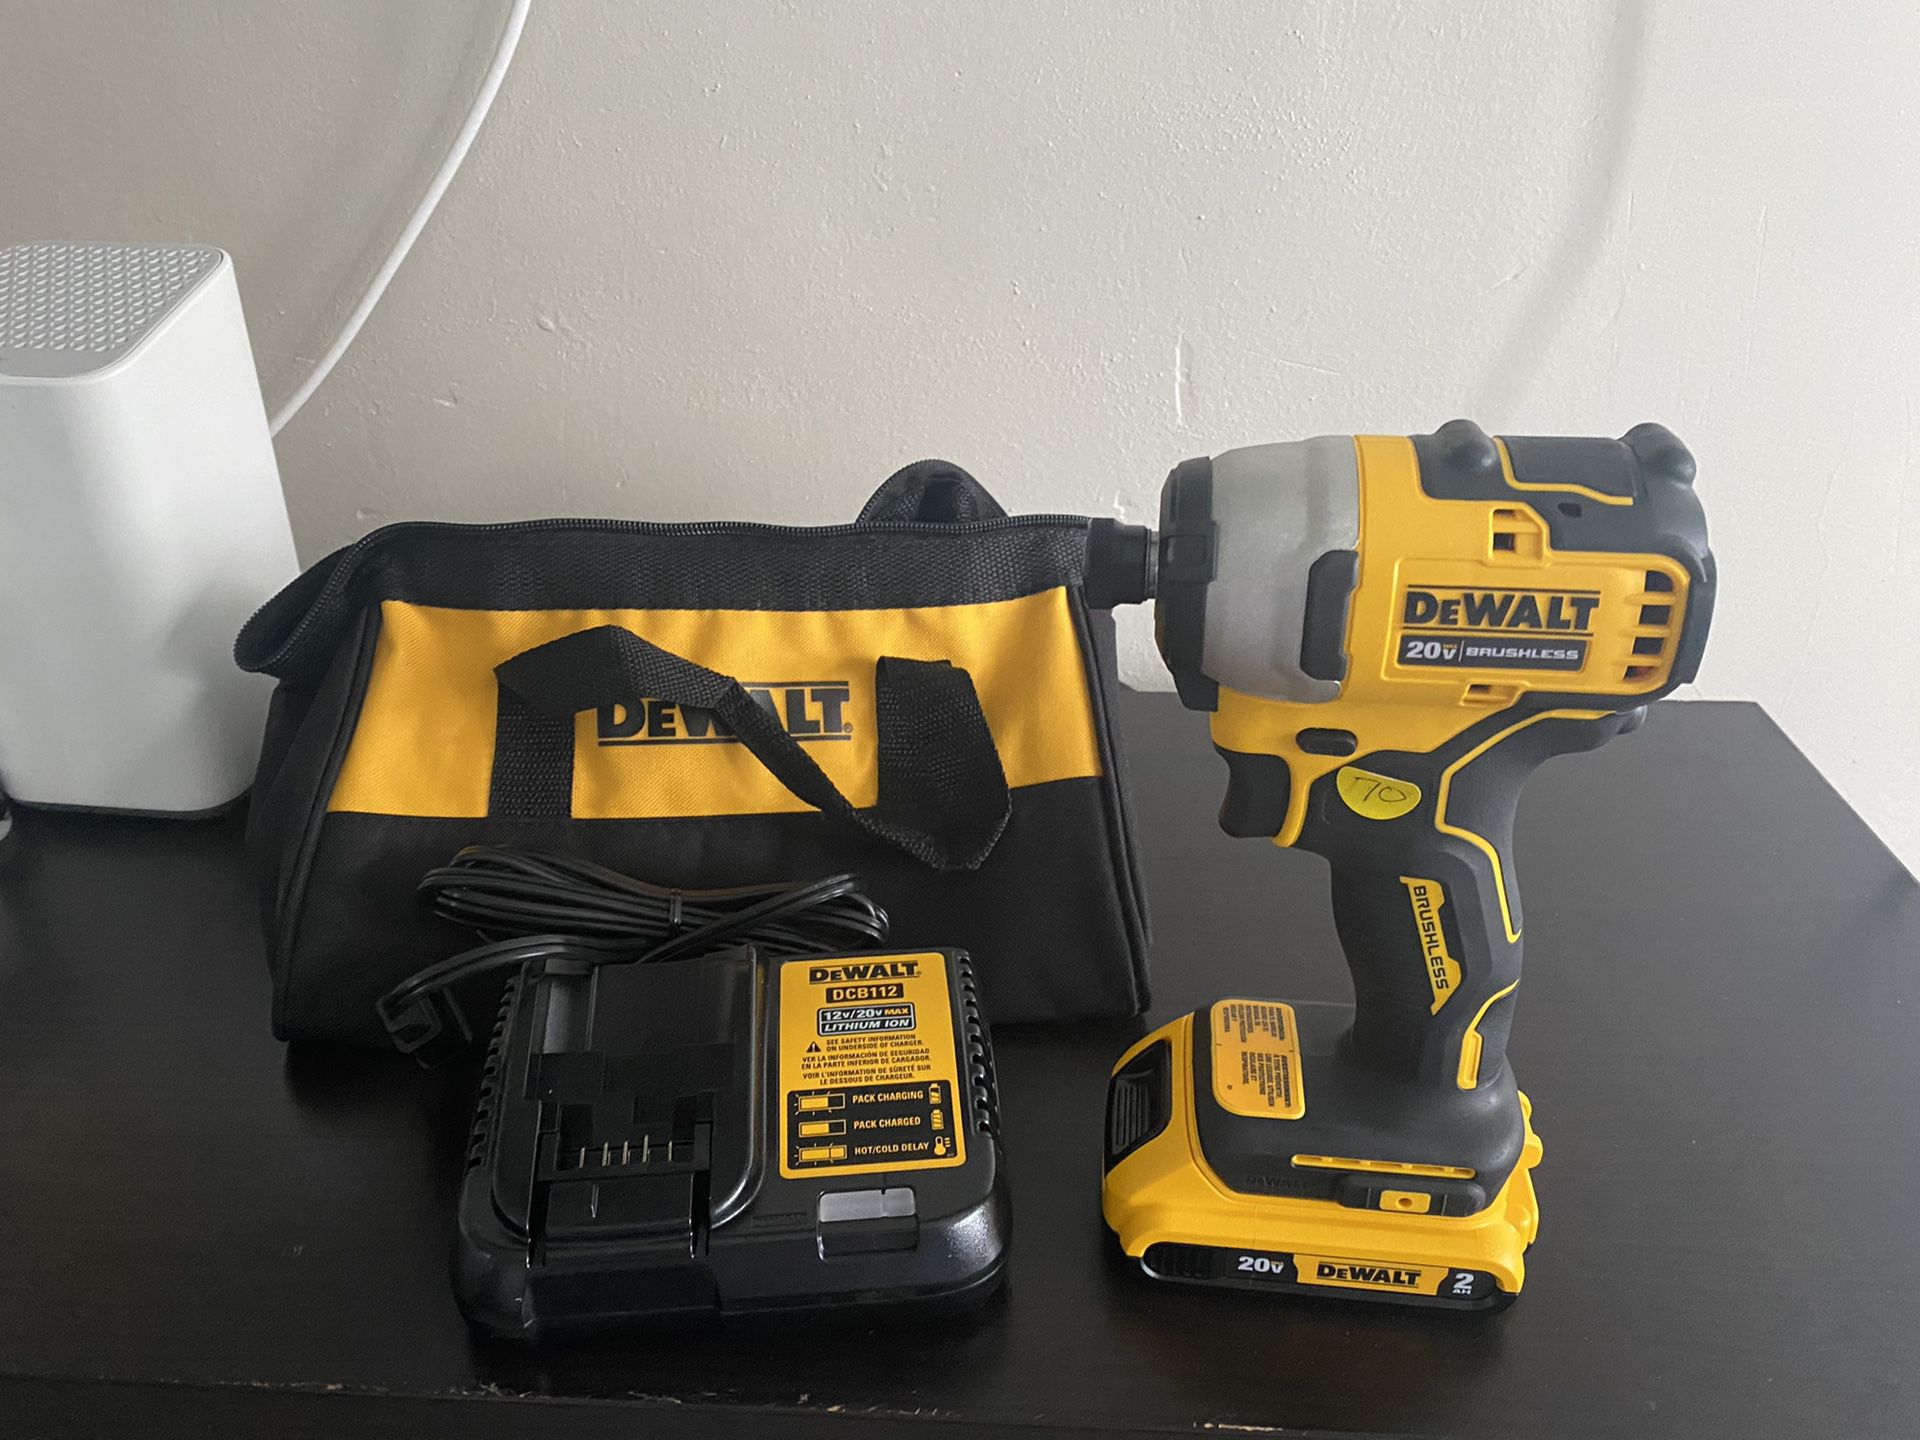 NEW DEWALT BRUSHLESS KIT IMPACT DRILL BATTERY AND CHARGER